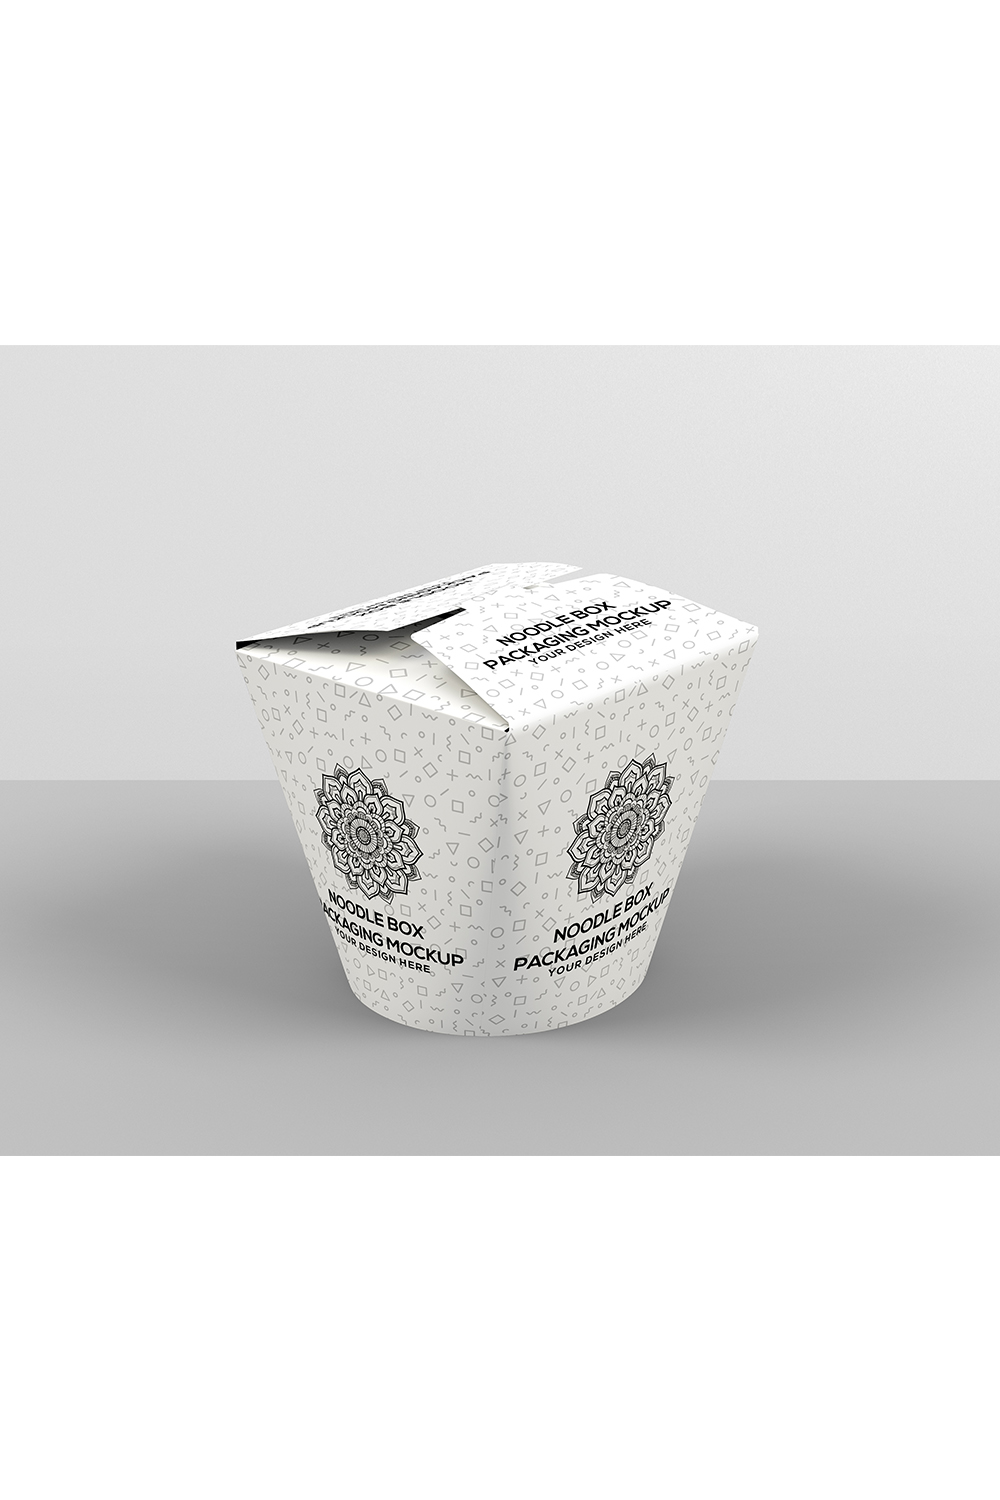 Round Base Noddle Box Packaging Mockup pinterest preview image.